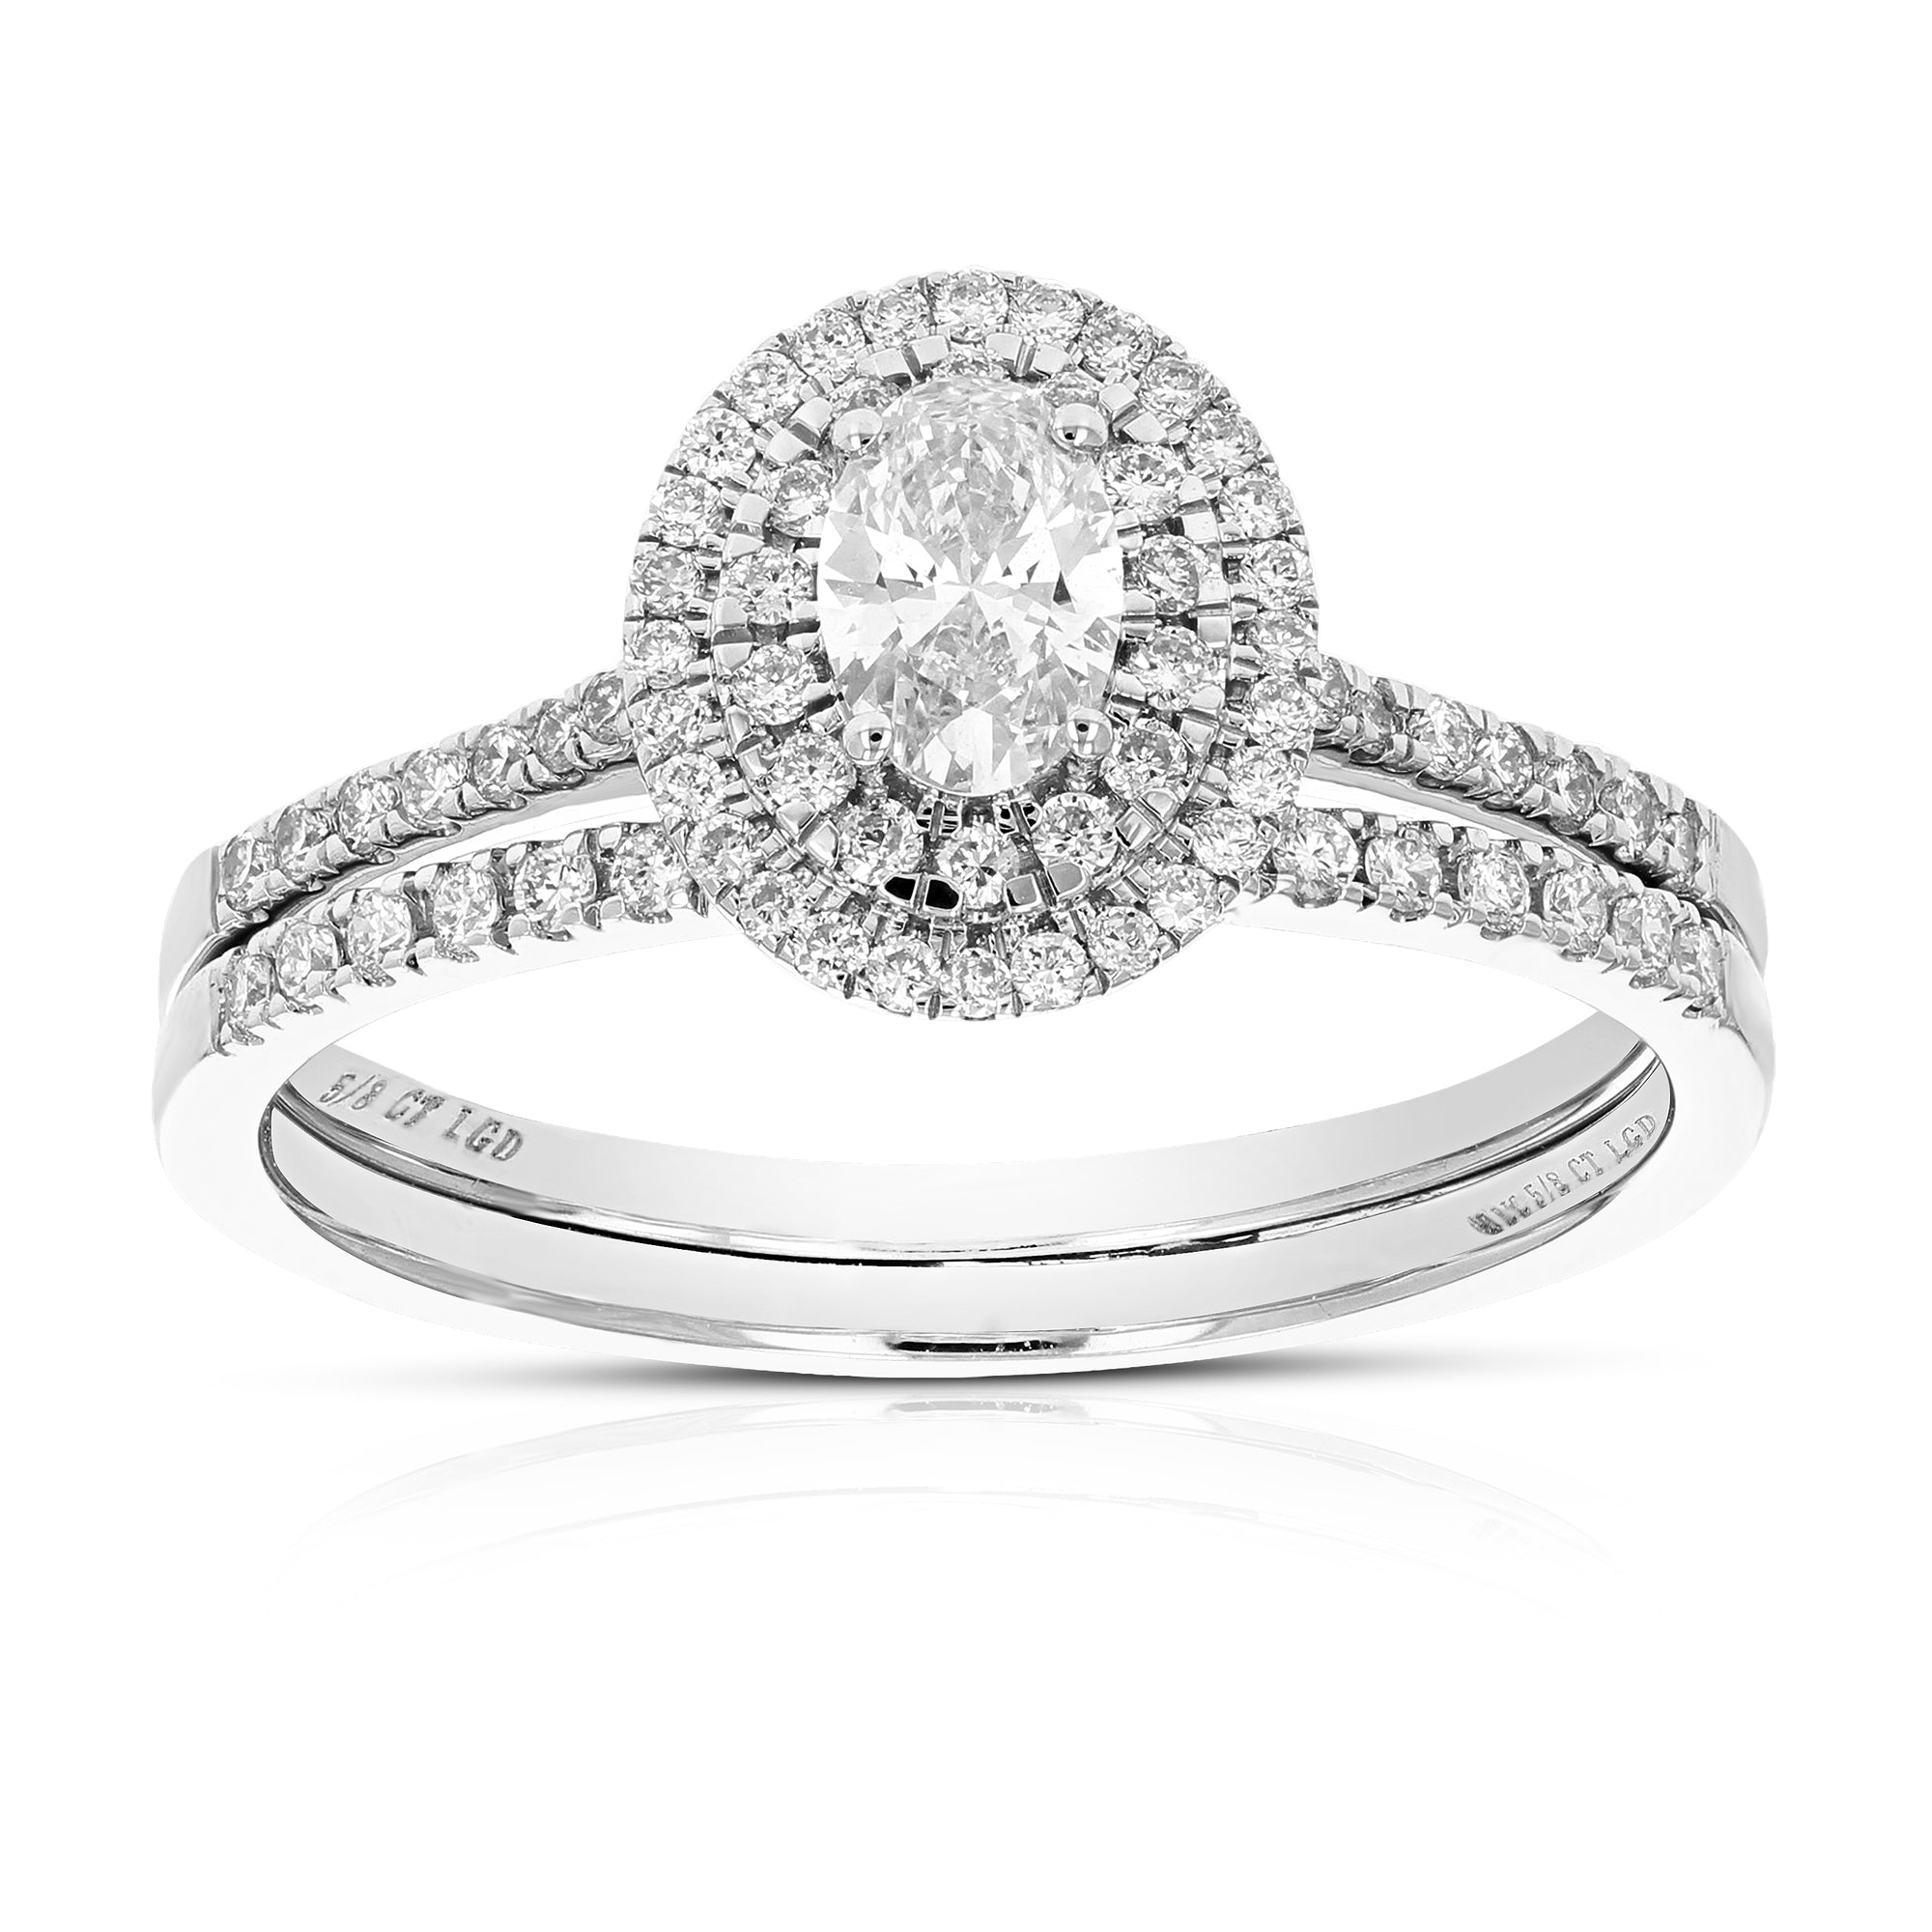 5/8 cttw Wedding Engagement Ring for Women, Round Lab Grown Engagement Ring in 14K White Gold, Prong Set